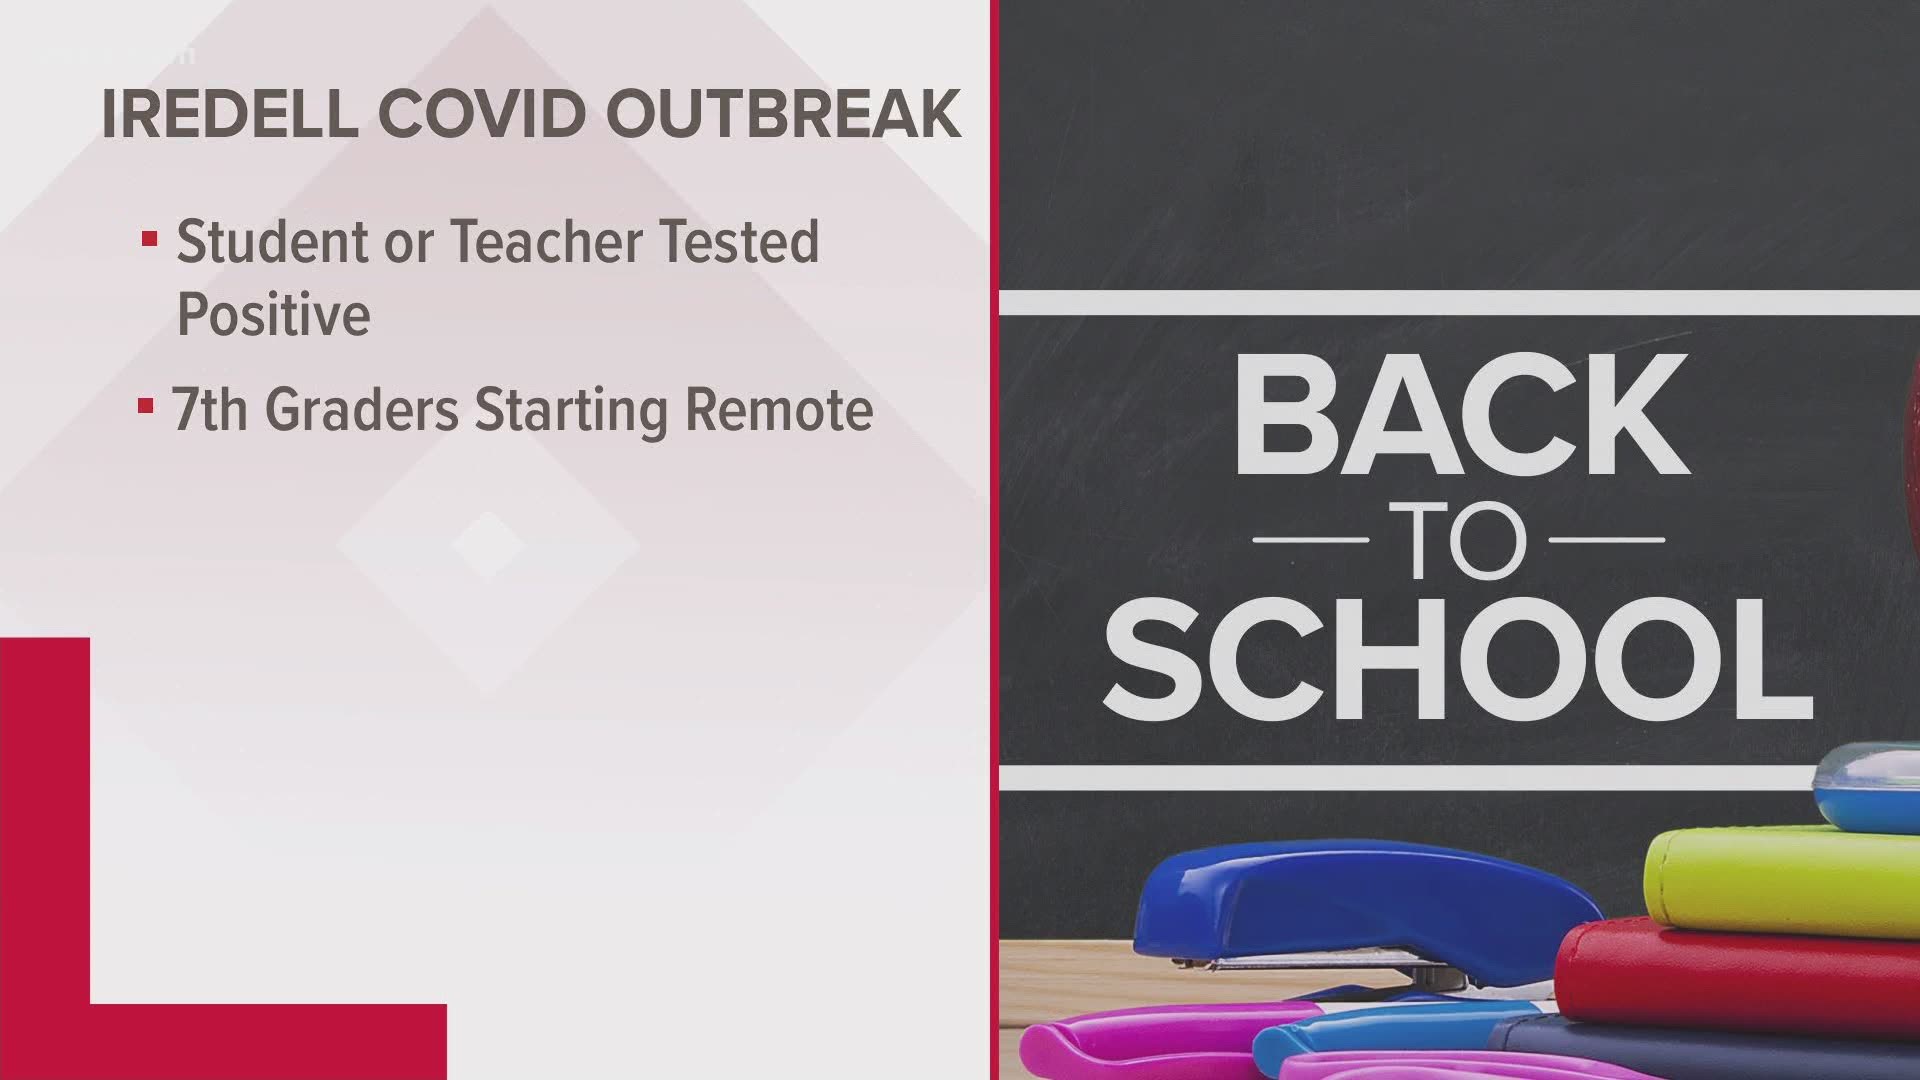 Iredell School District announced on Sunday that a student or teacher has tested positive for the coronavirus.